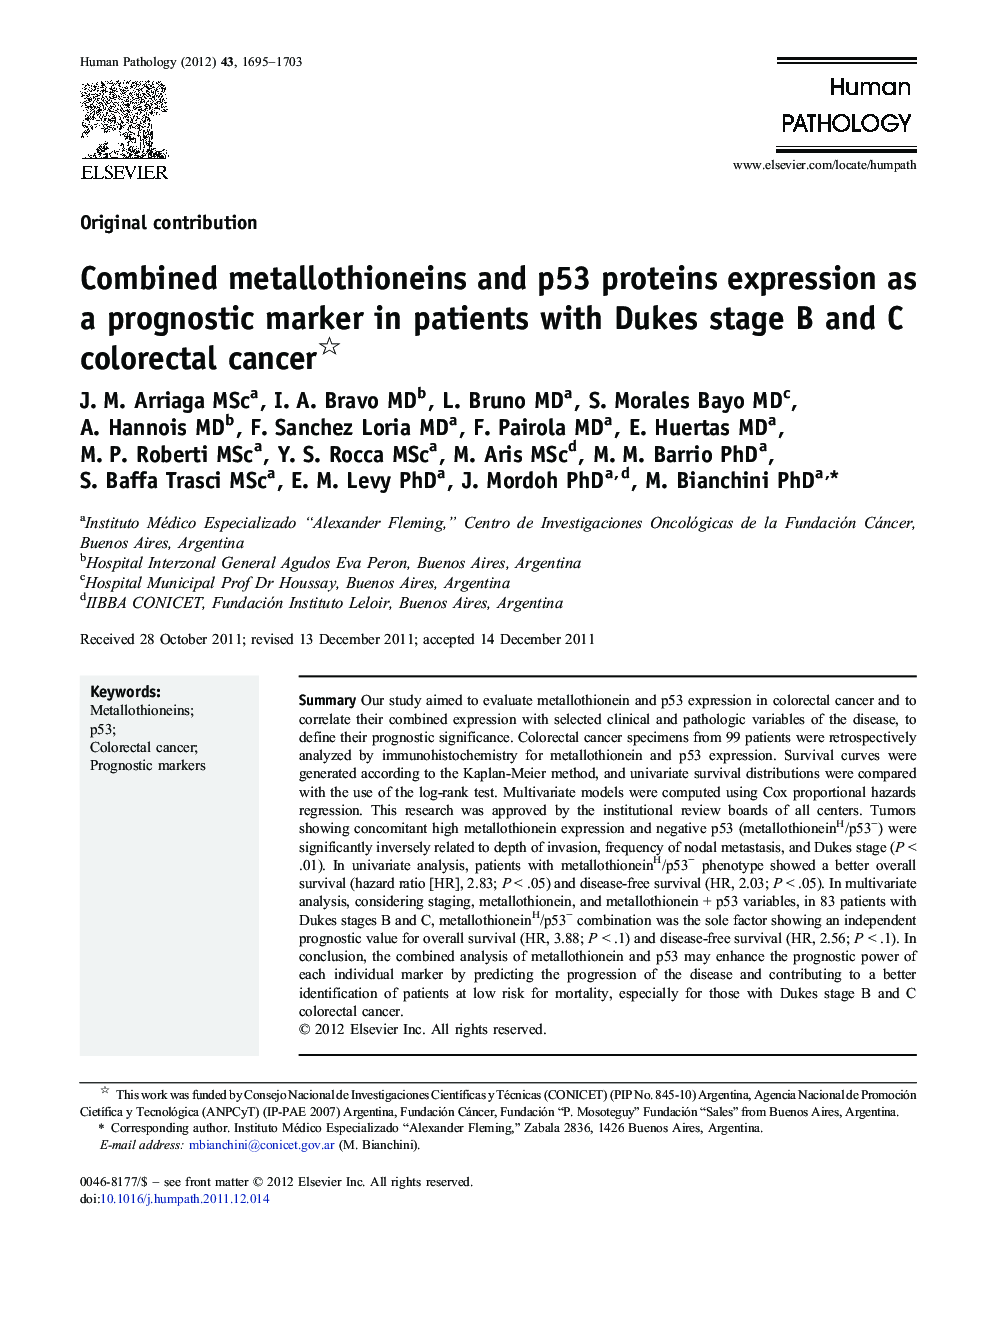 Combined metallothioneins and p53 proteins expression as a prognostic marker in patients with Dukes stage B and C colorectal cancer 